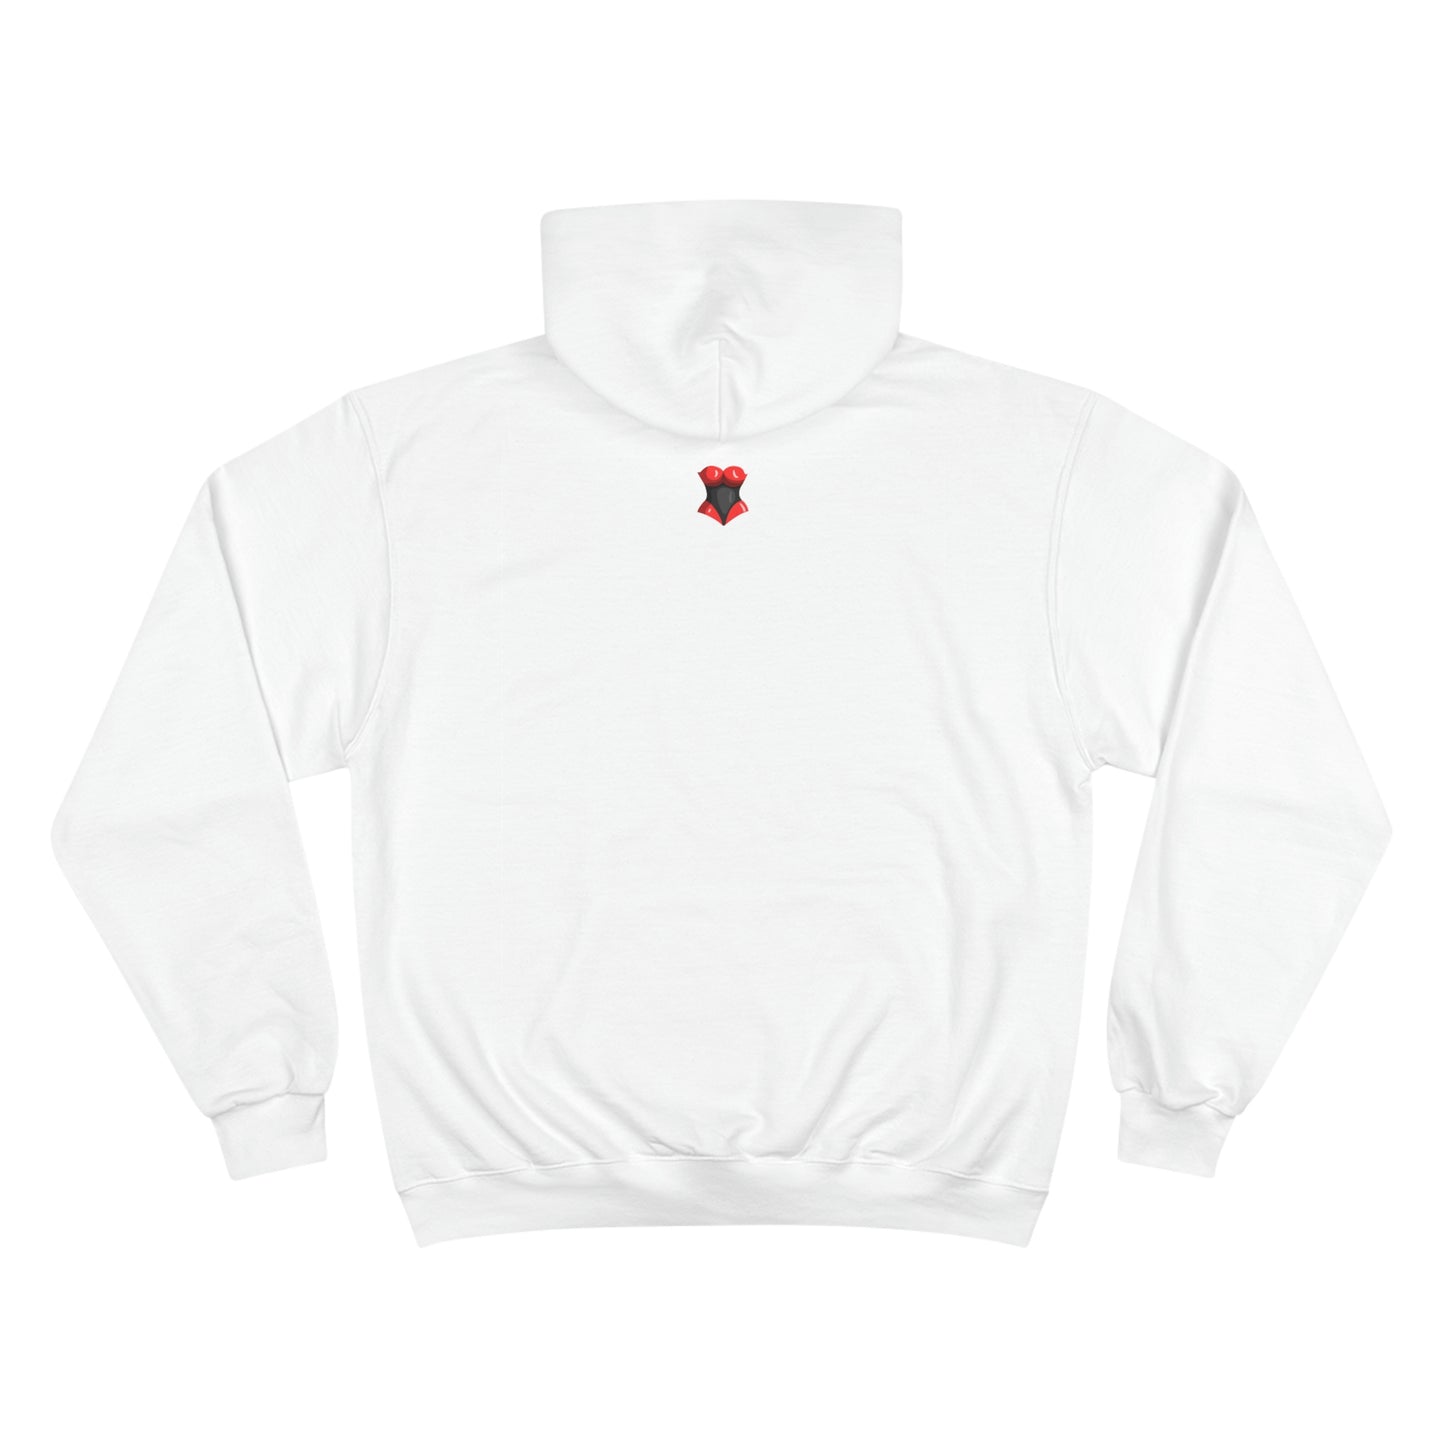 The Submissive Smile | Champion Hoodie